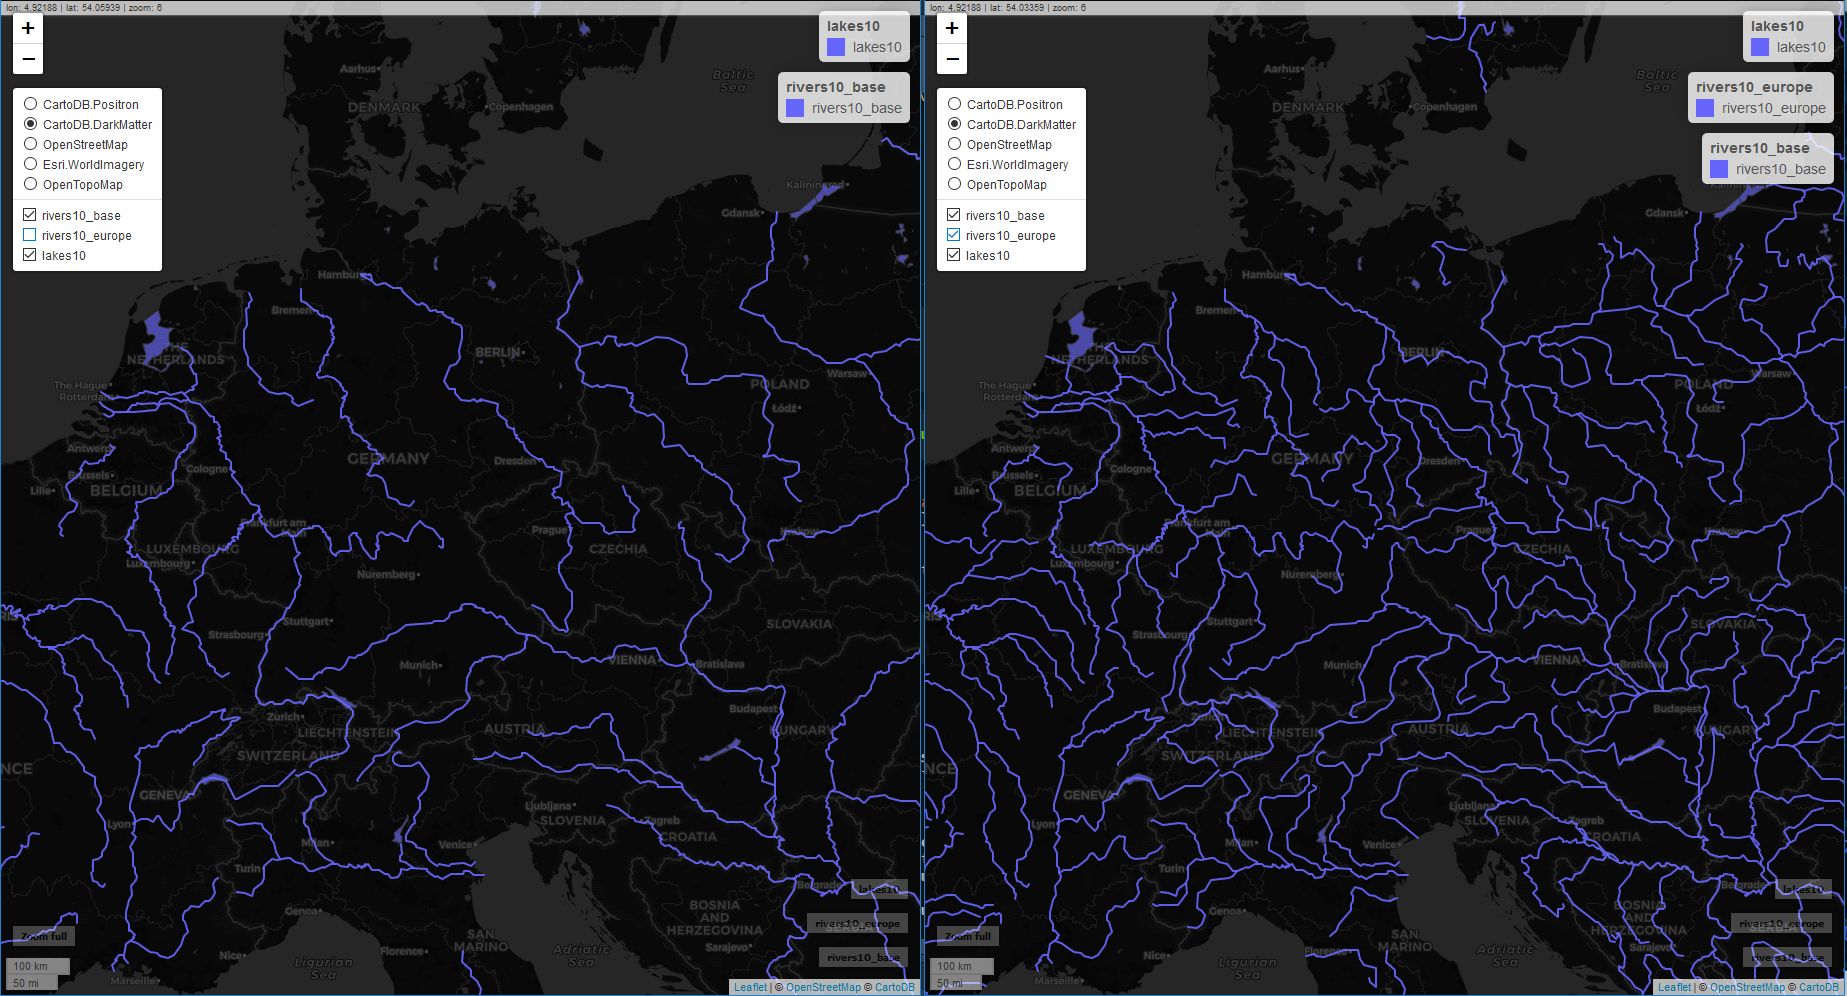 Comparison of base and supplemental data for rivers in Europe. Mapview is just awesome for this kind of exploratory tasks.